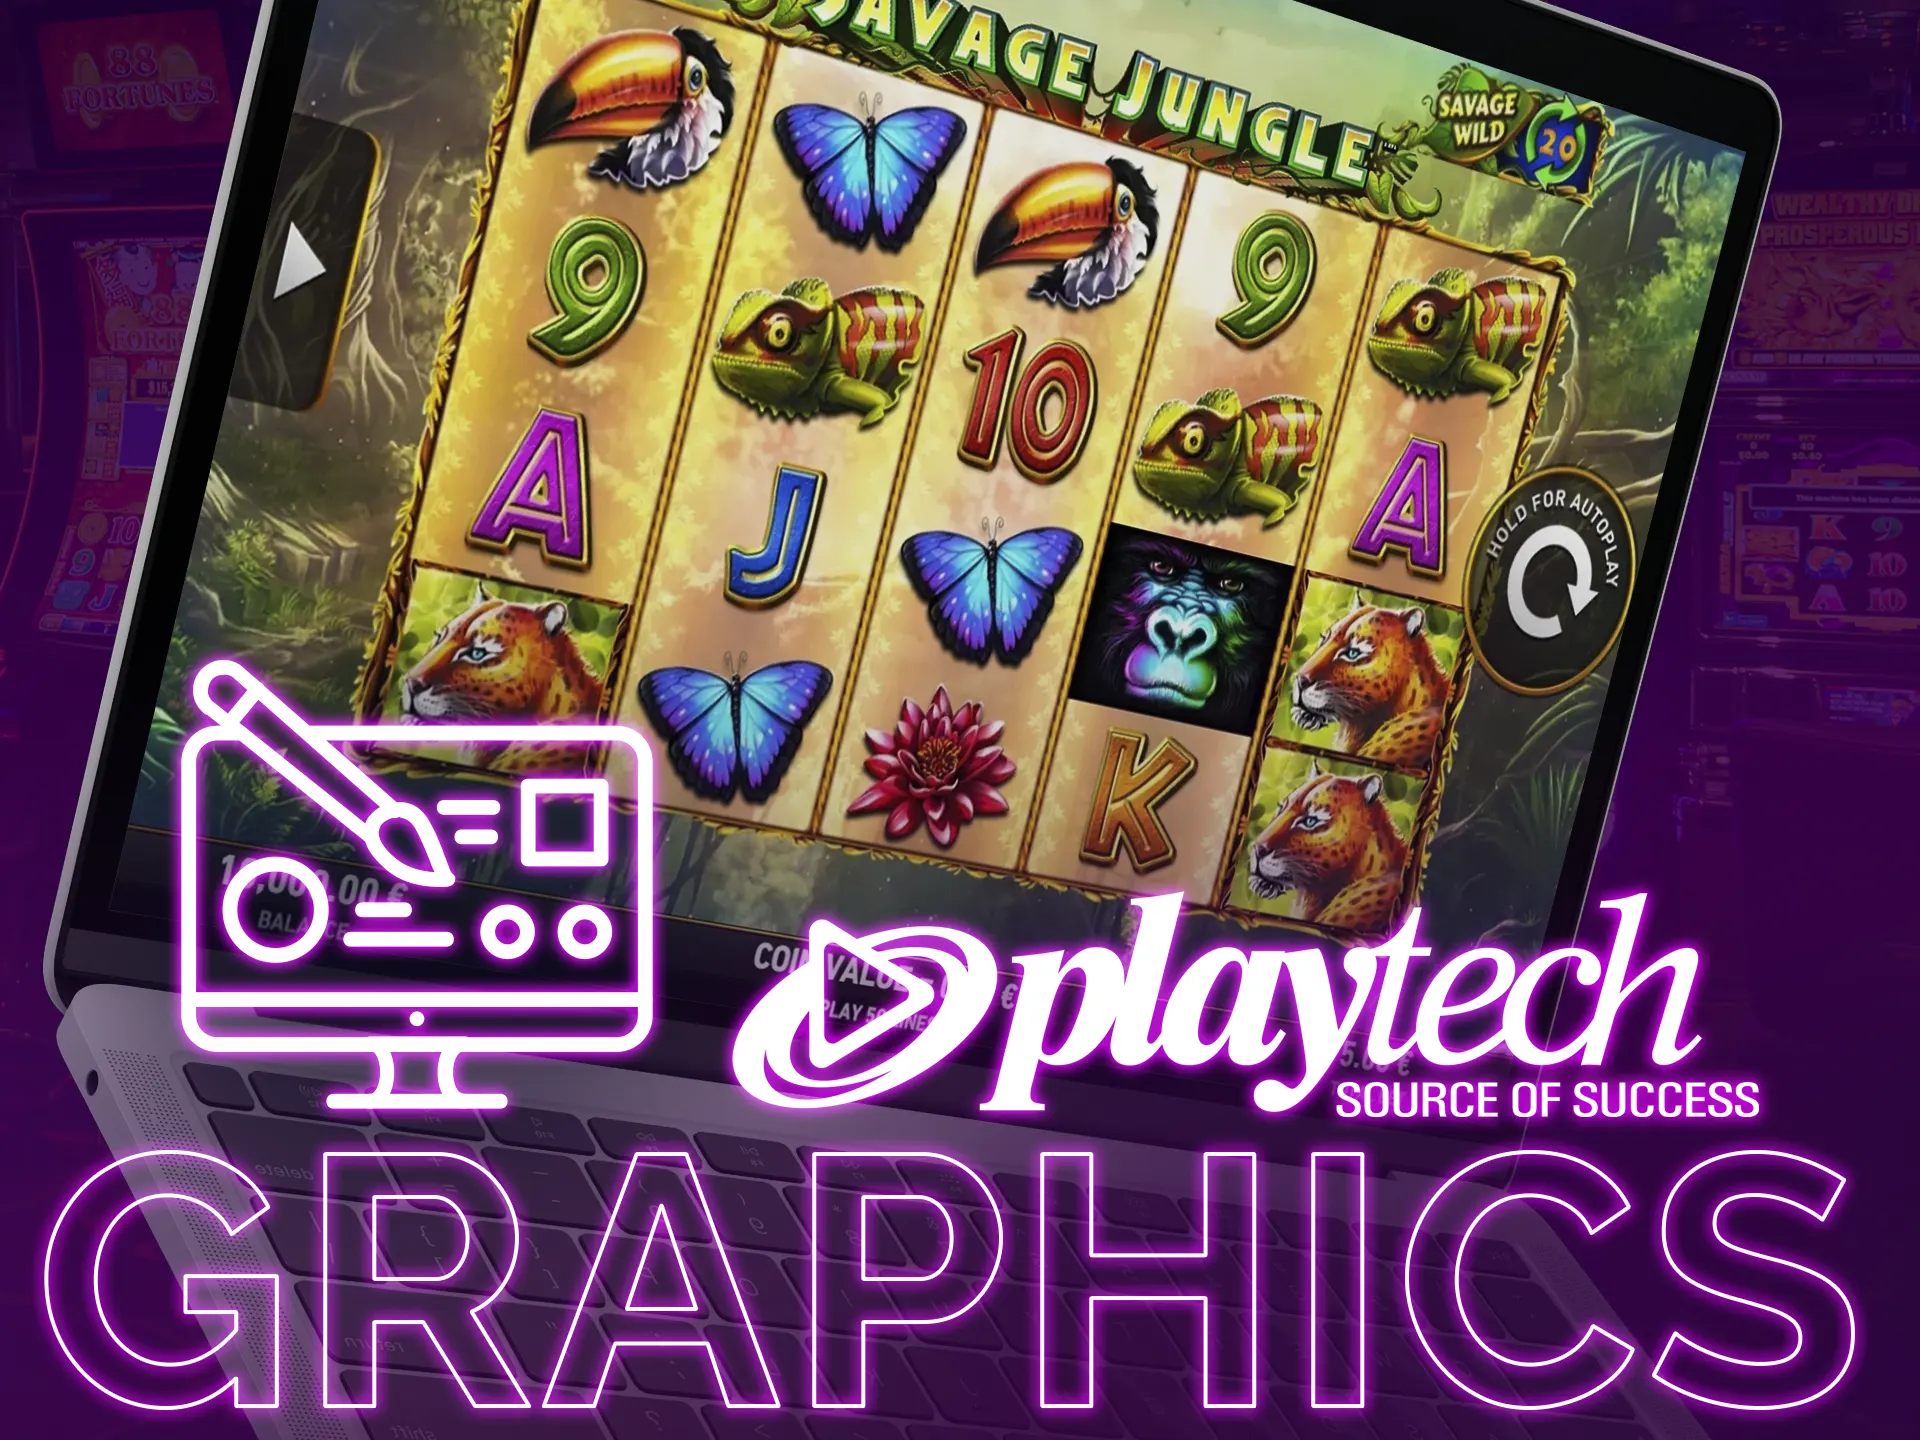 Playtech provides games with top-quality graphics.